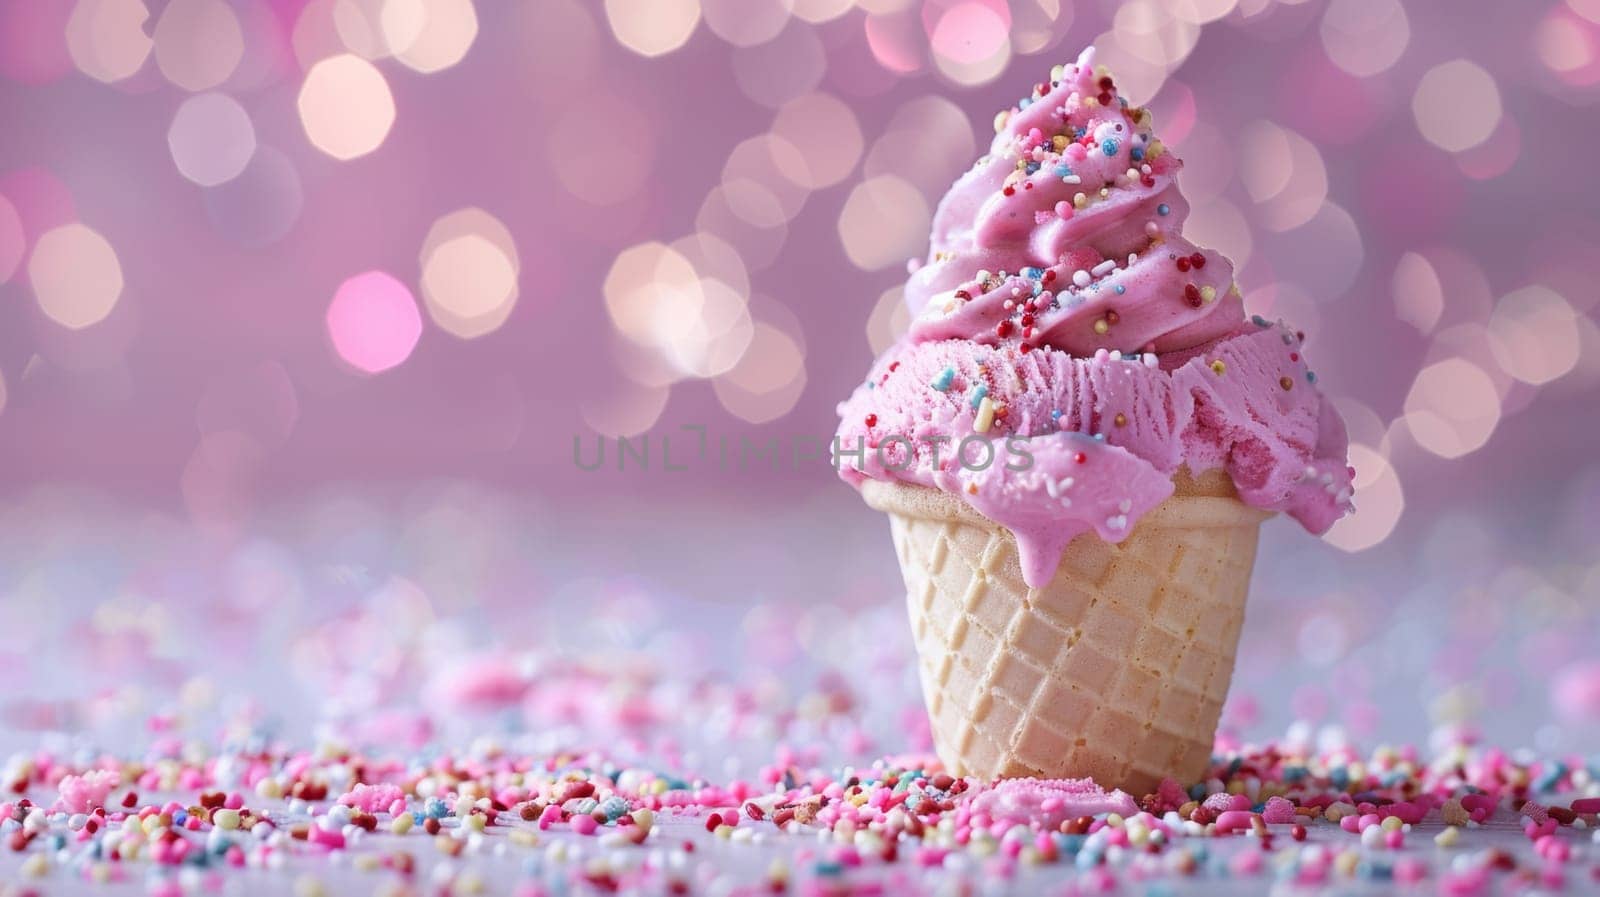 A close up of a ice cream cone with pink frosting, AI by starush